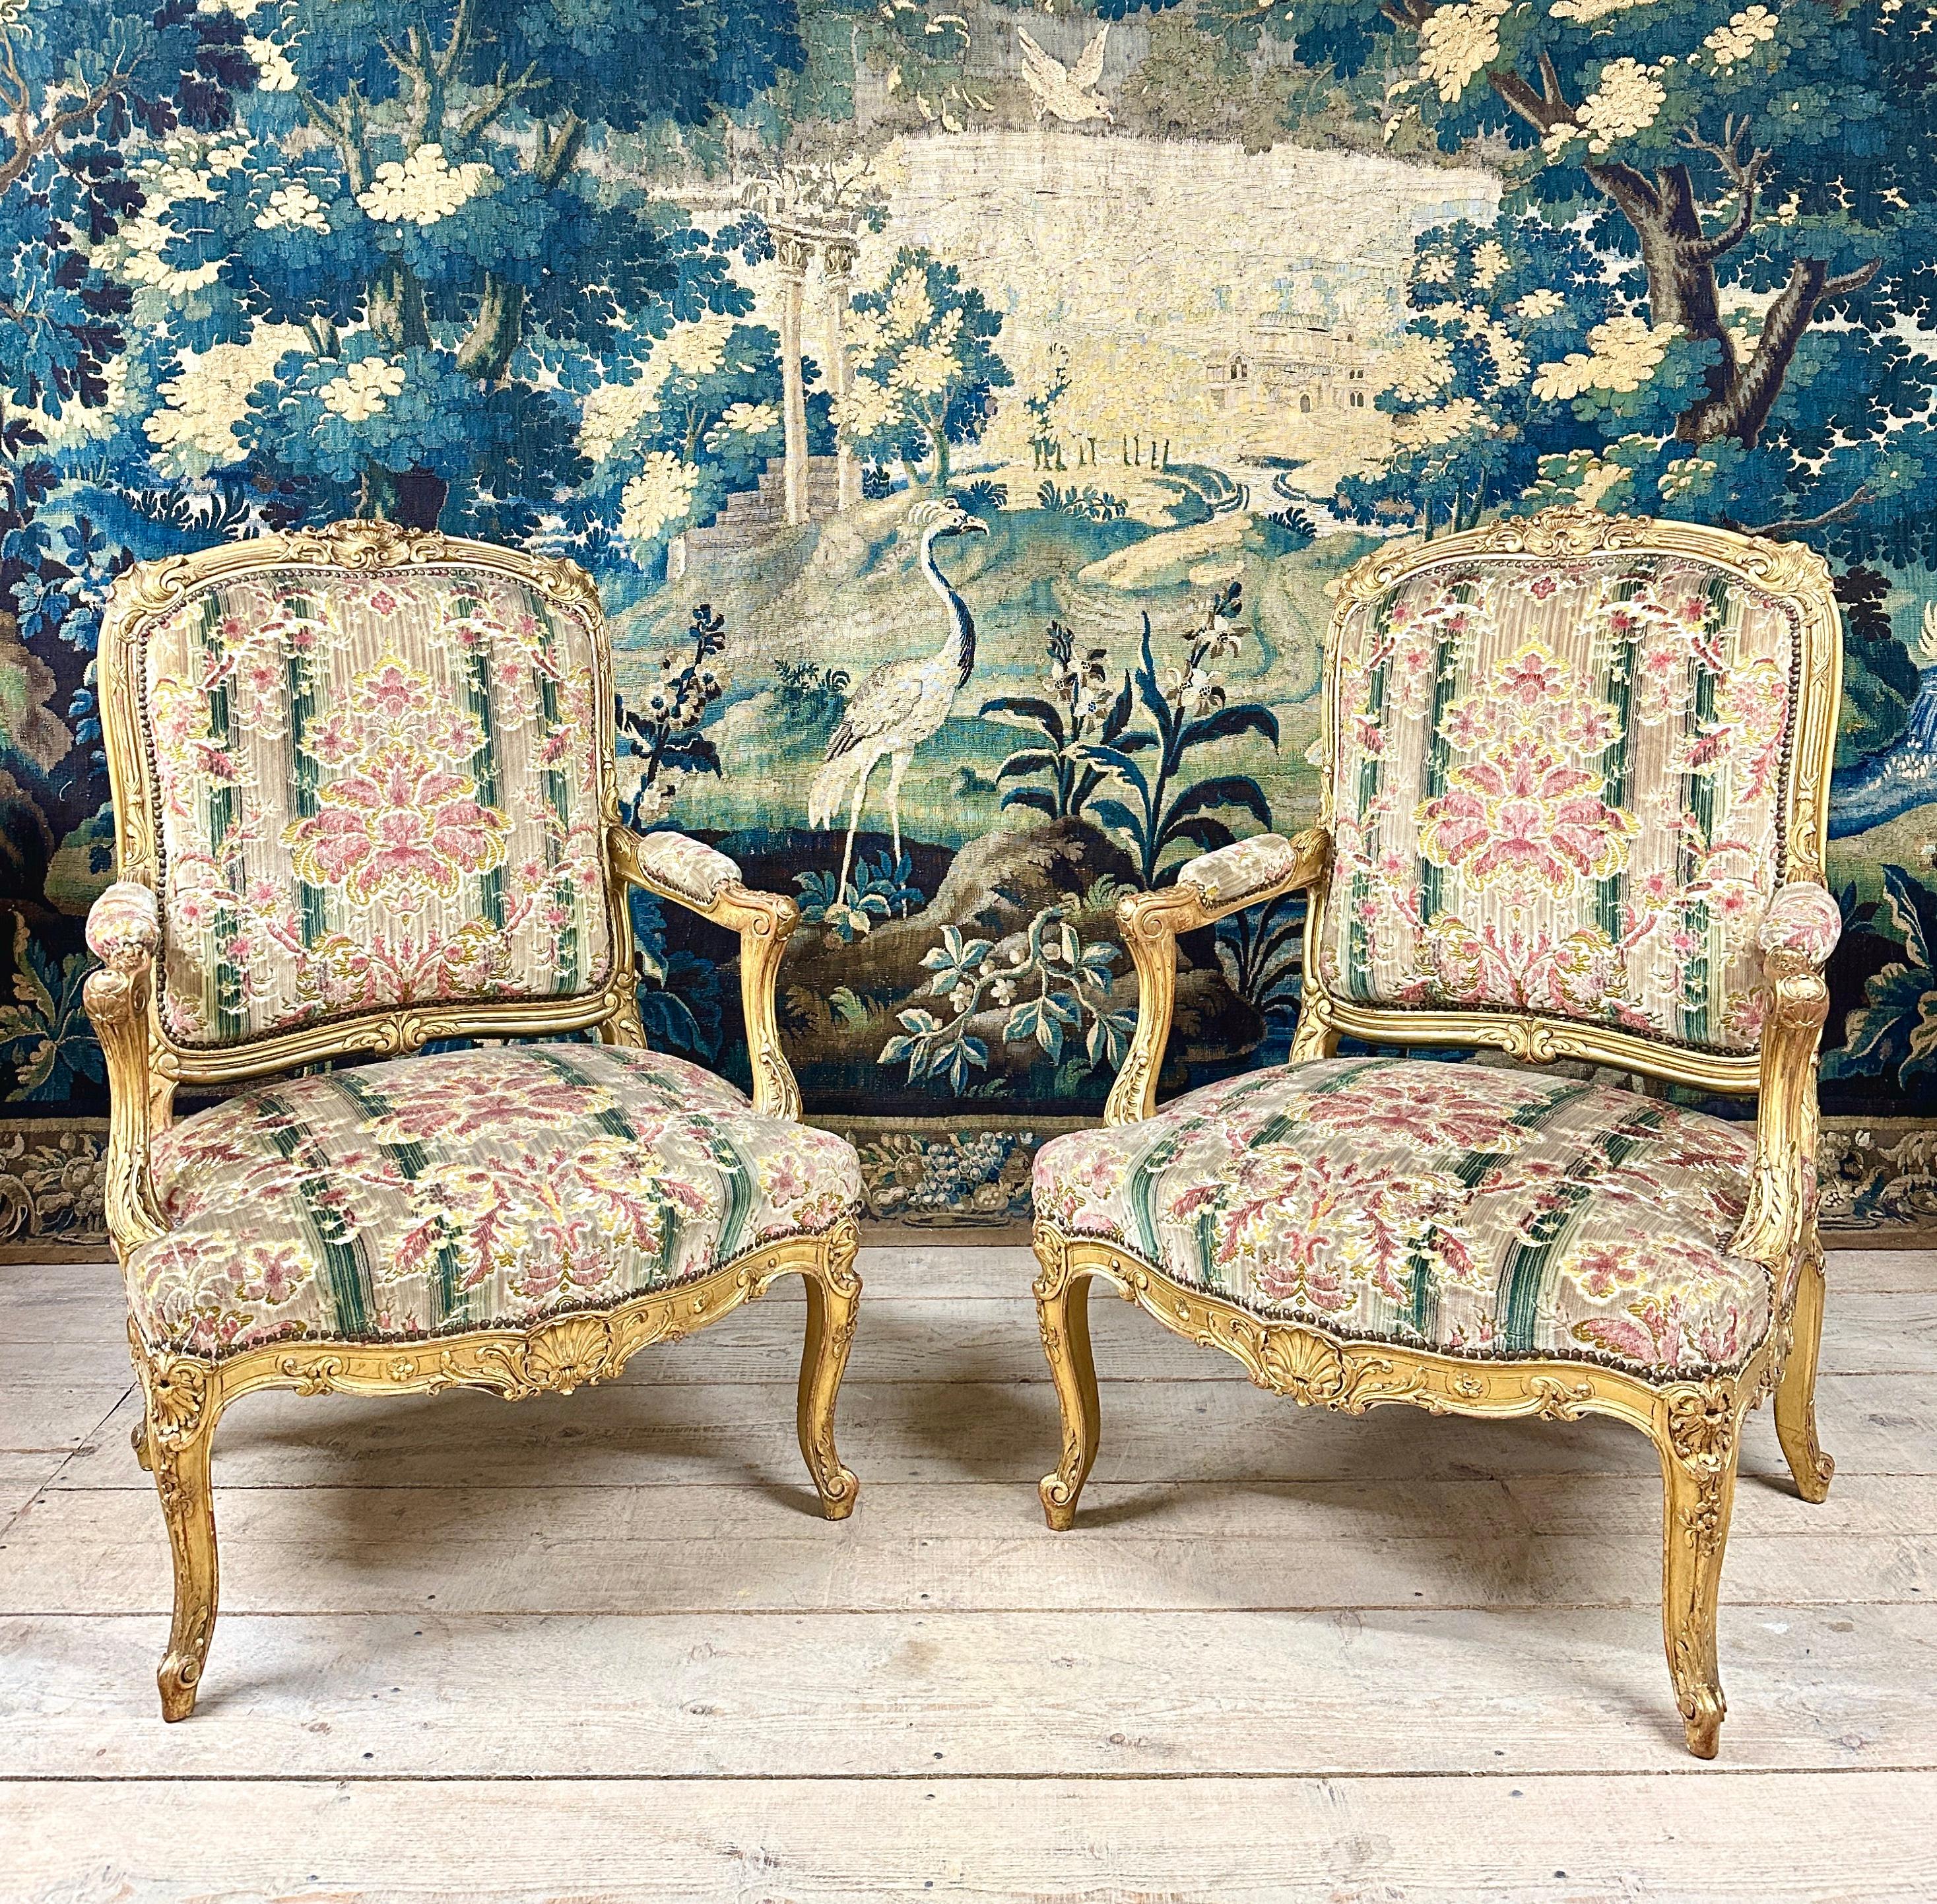 Pair of richly carved giltwood armchairs in the style of Jean-Baptiste Tilliard, famous 18th century cabinetmaker active under Louis XV, a very similar model of which is kept at the MET museum. Work in gilded wood with 19th century Napoleon III